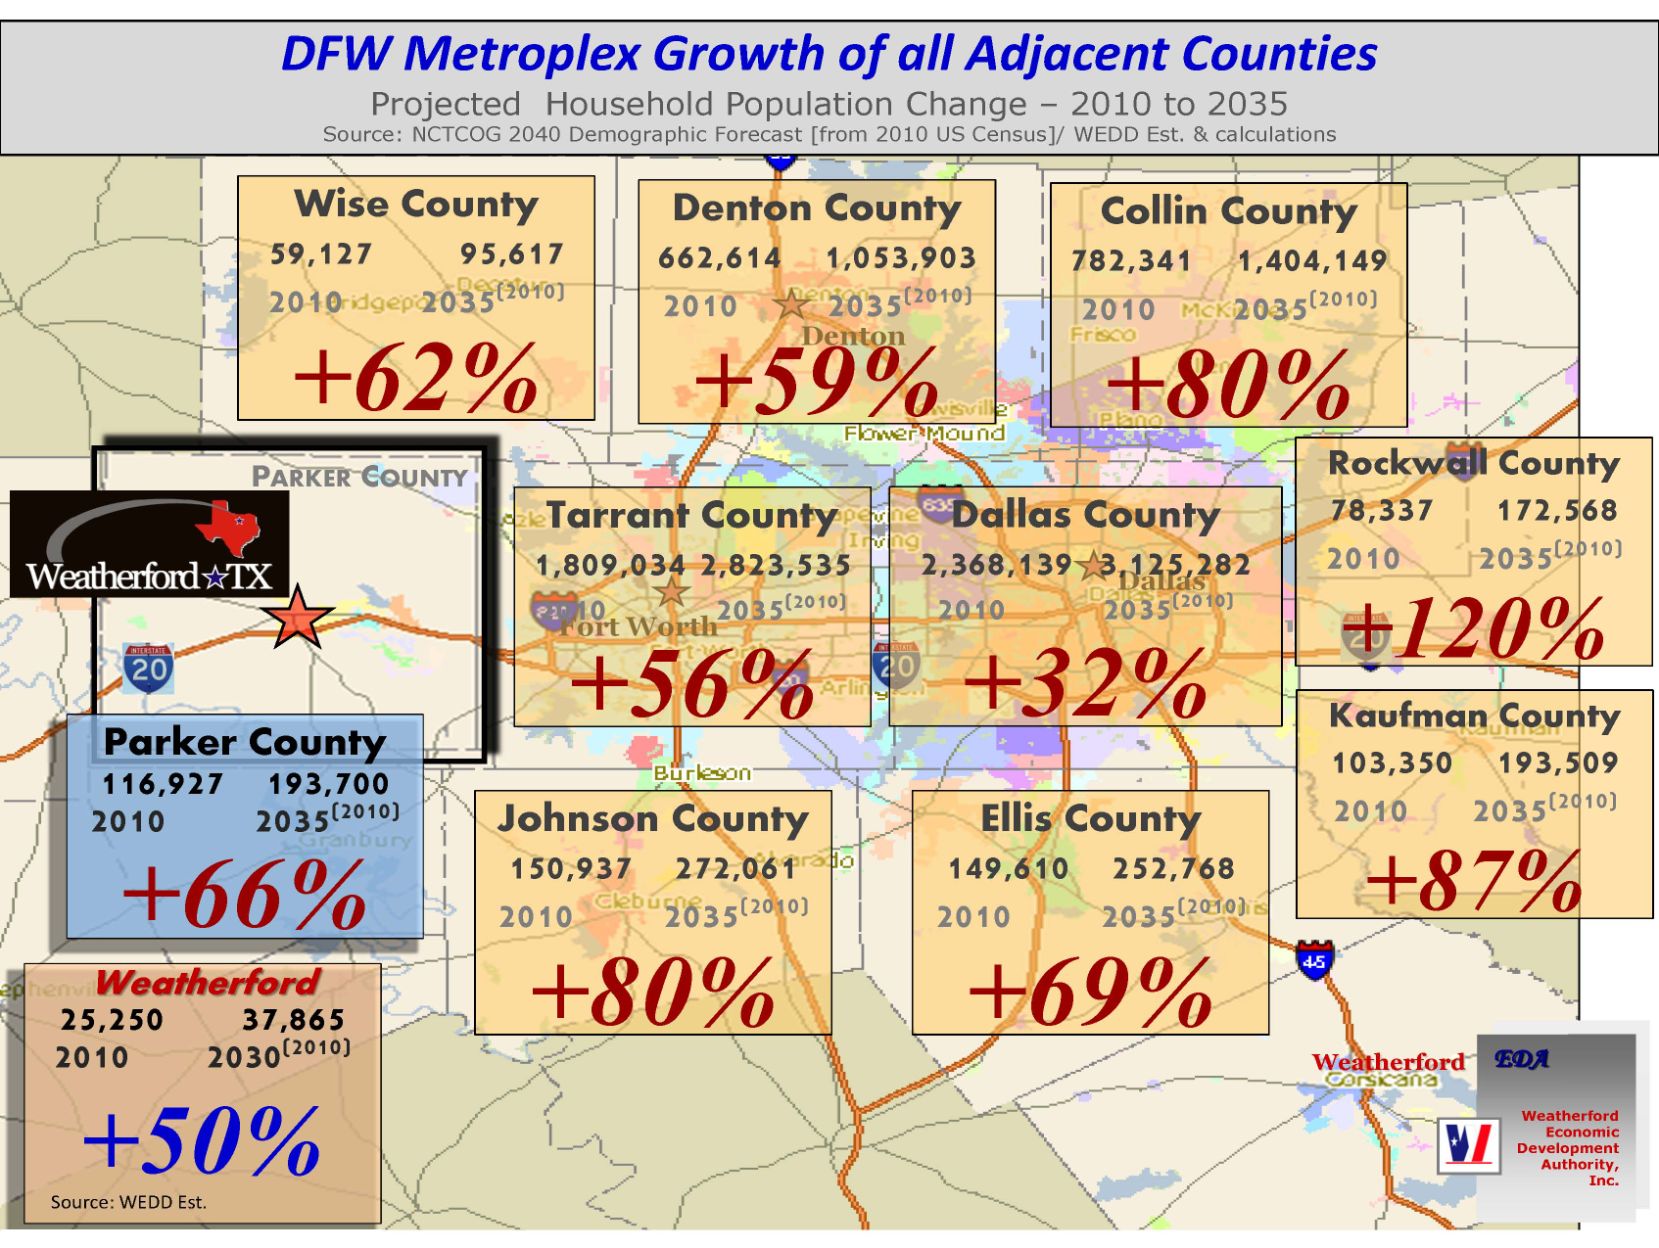 low home inventory in dallas fort worth area